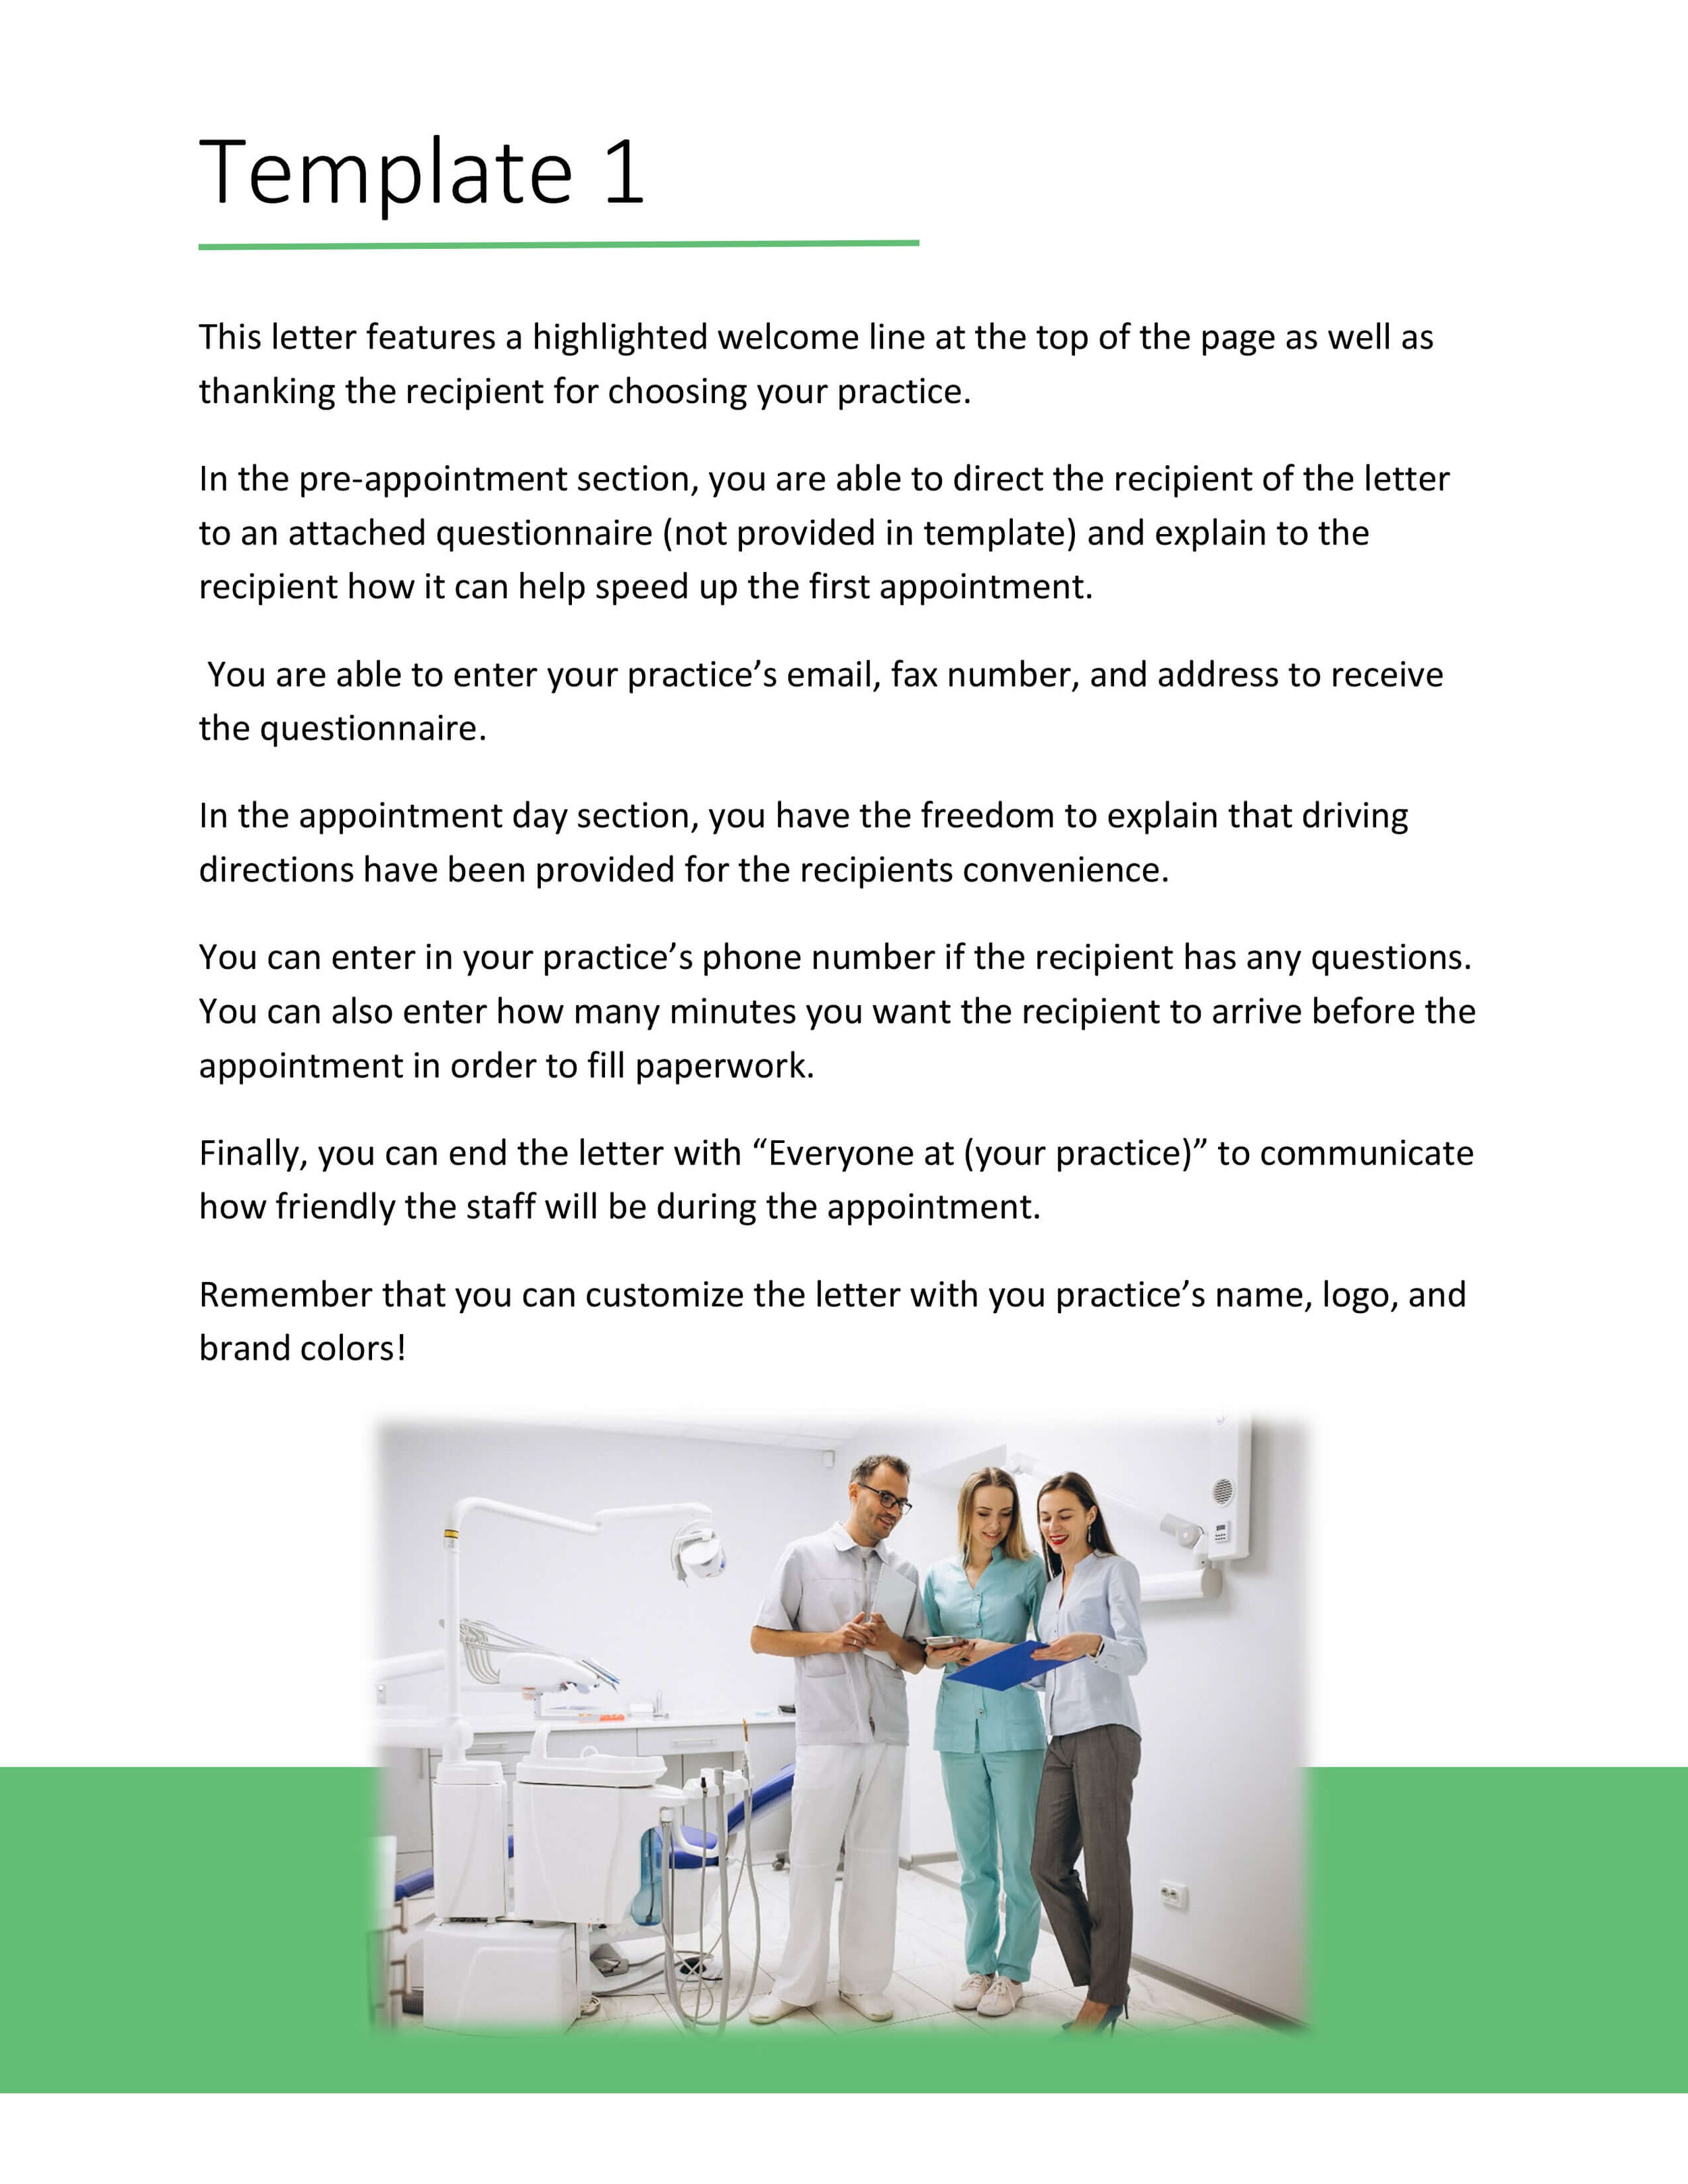 5 New Patient Welcome Letter Templates for Dentists-3.jpg